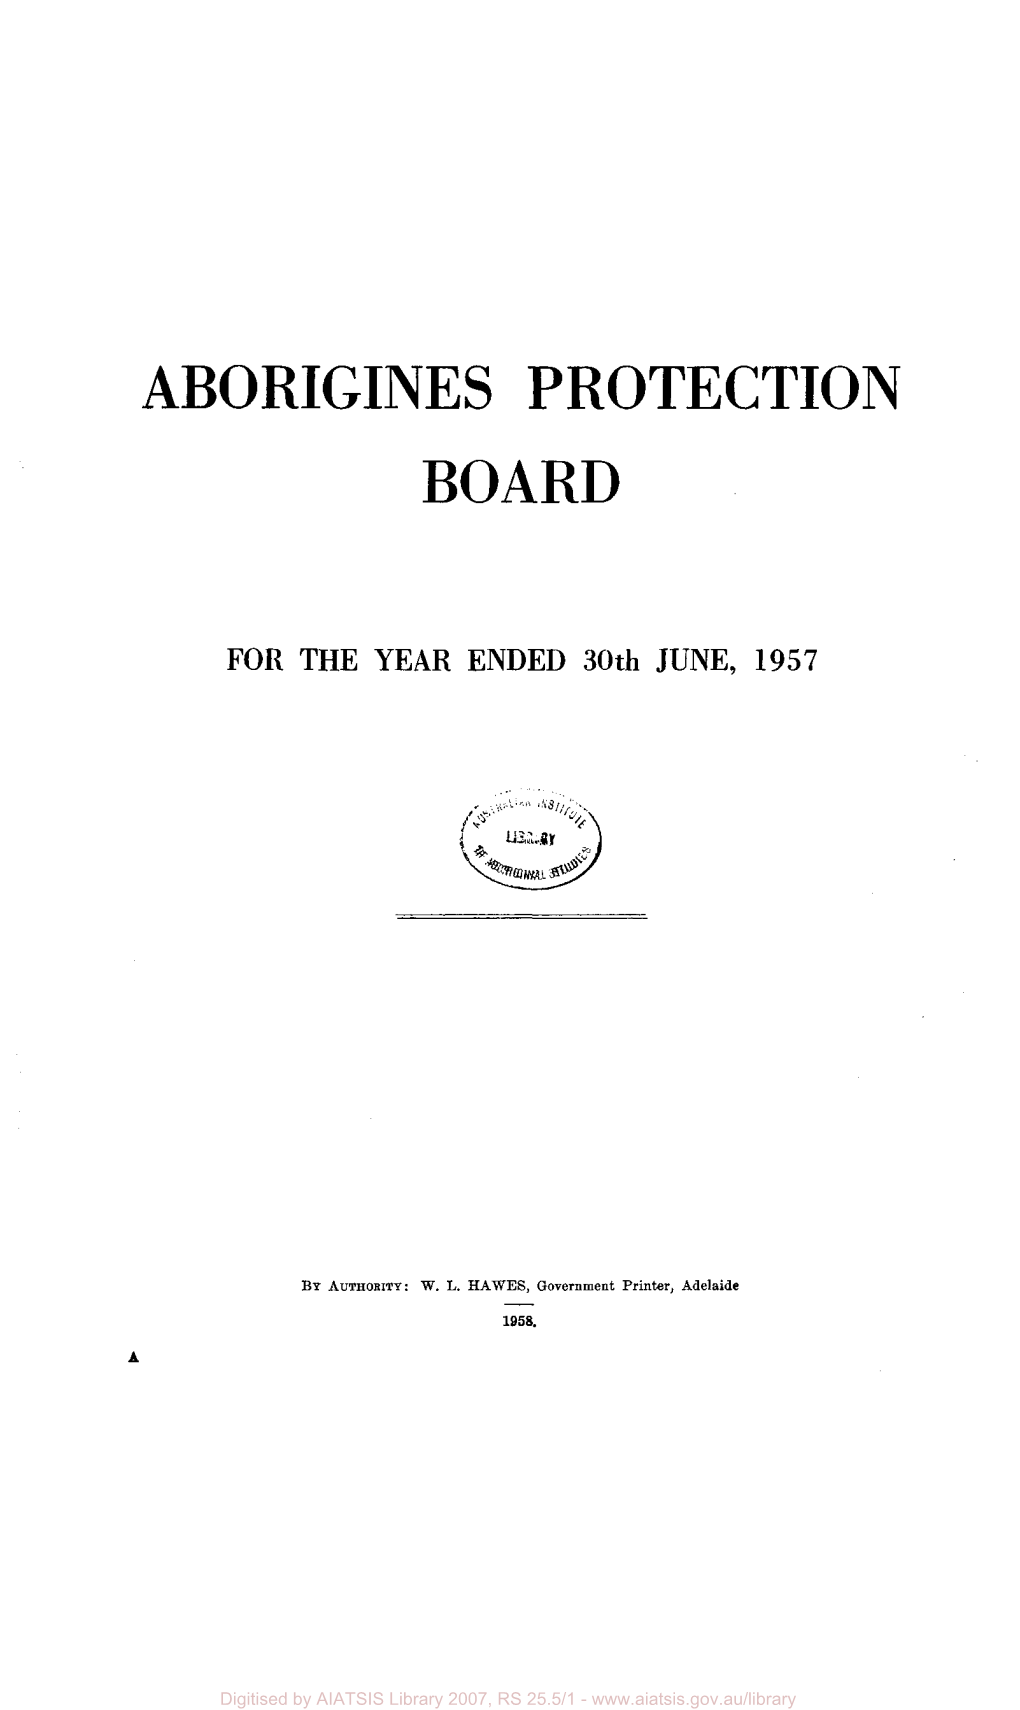 Report of the Aborigines Protection Board for the Year Ended 30Th June, 1957